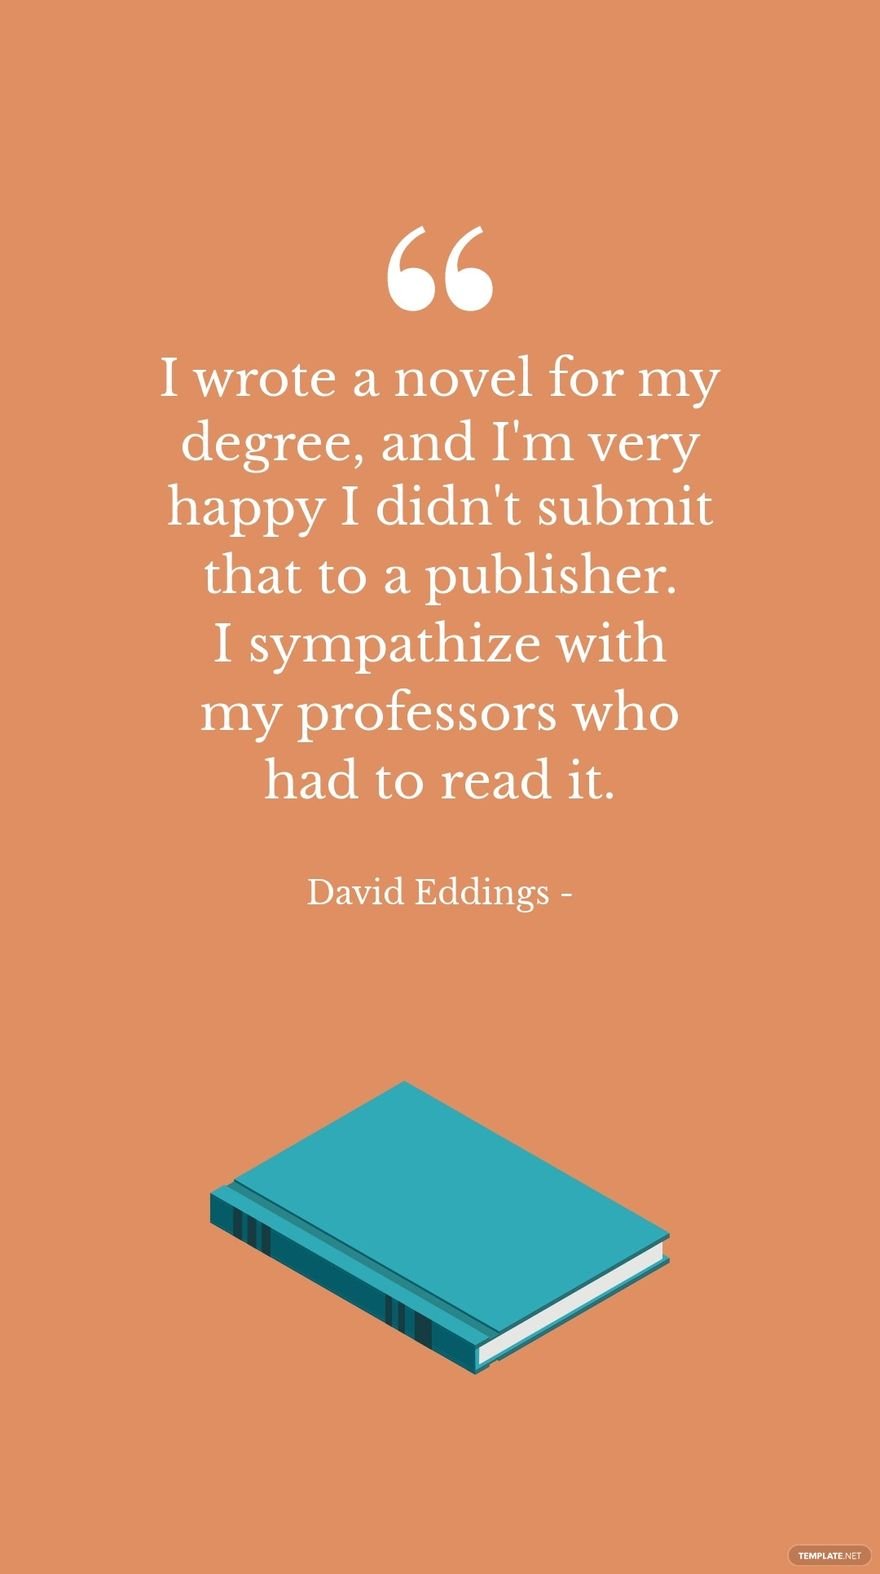 David Eddings - I wrote a novel for my degree, and I'm very happy I didn't submit that to a publisher. I sympathize with my professors who had to read it.